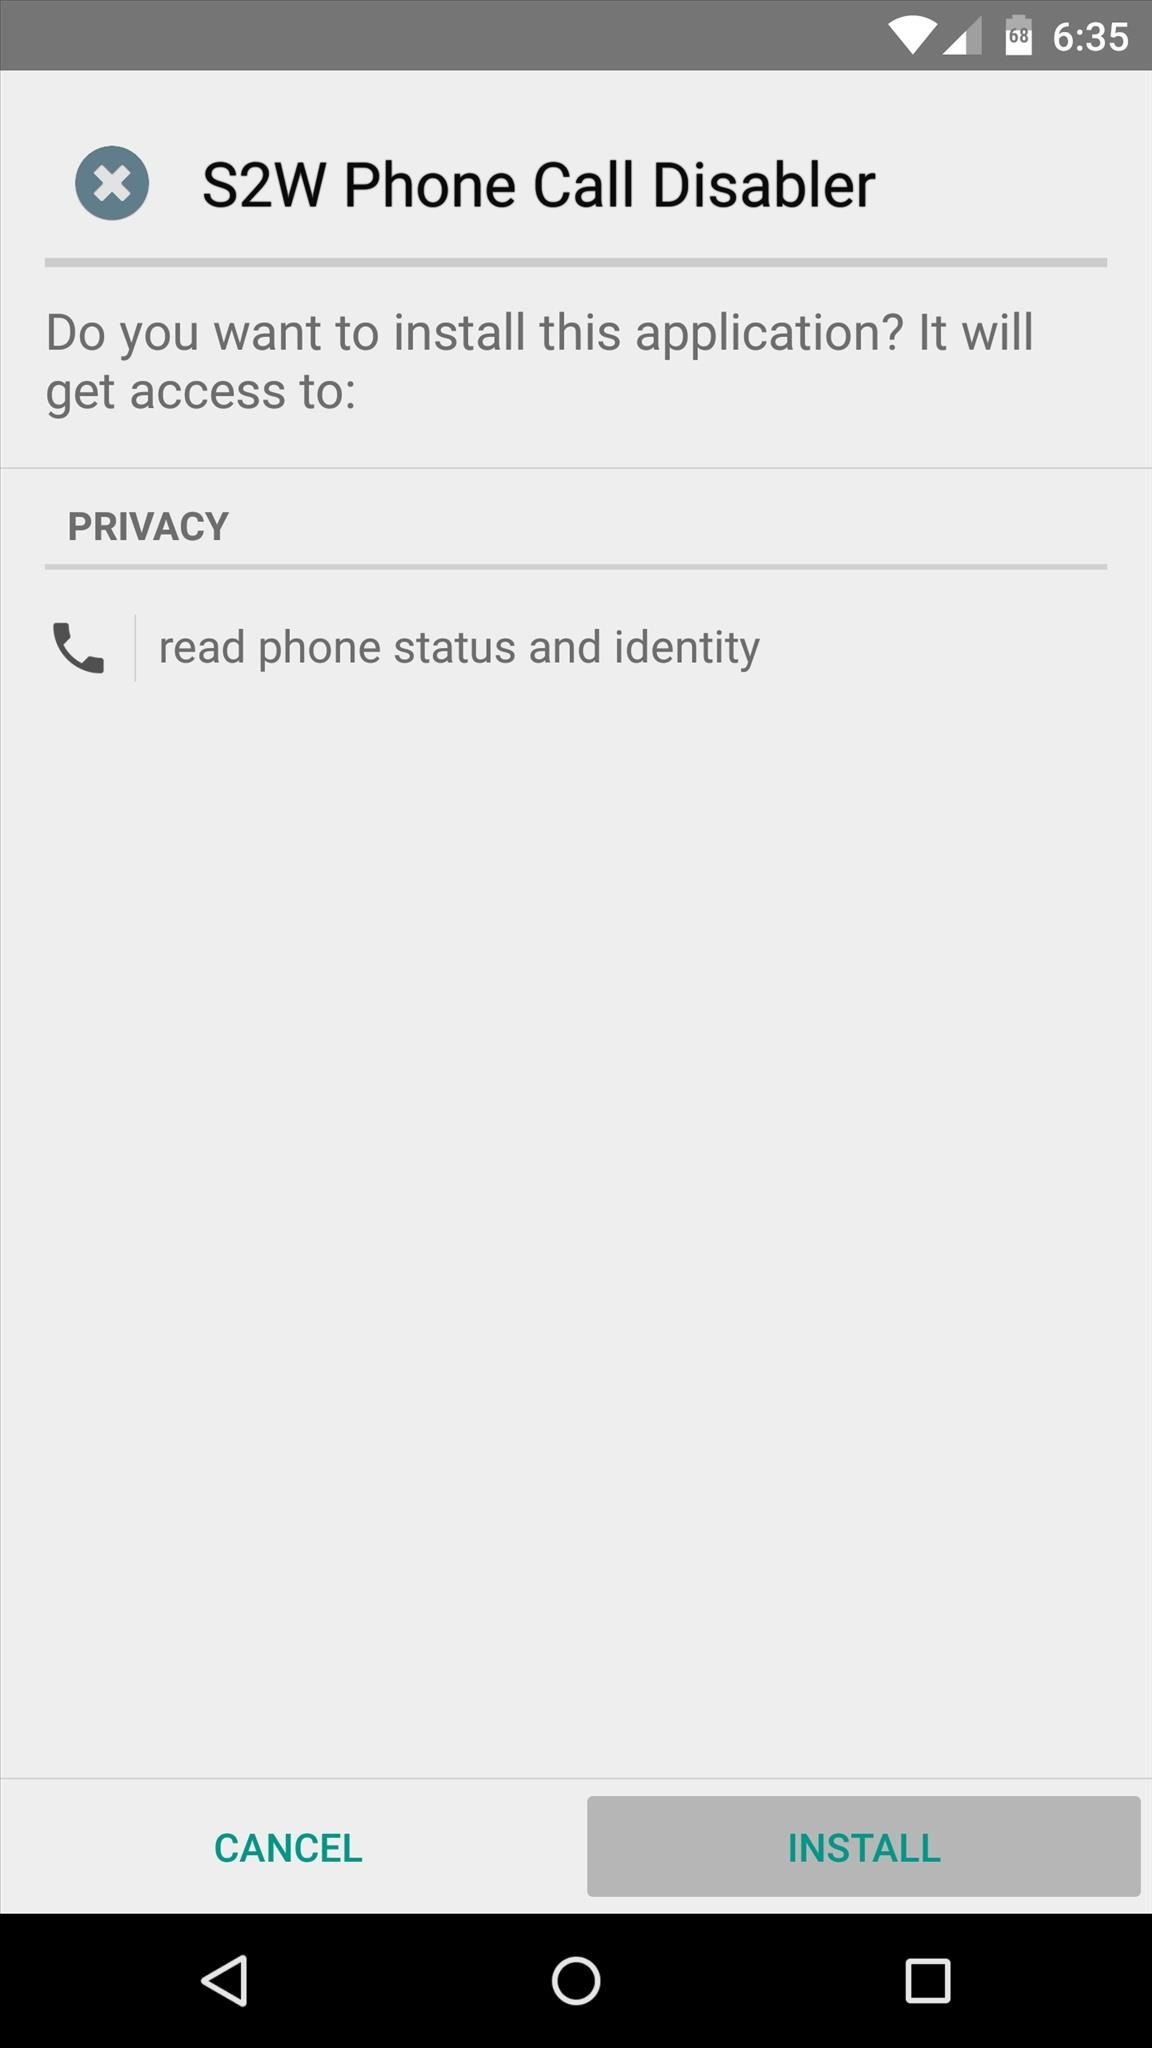 How to Disable Double-Tap to Wake While Making Calls on Your Nexus 6